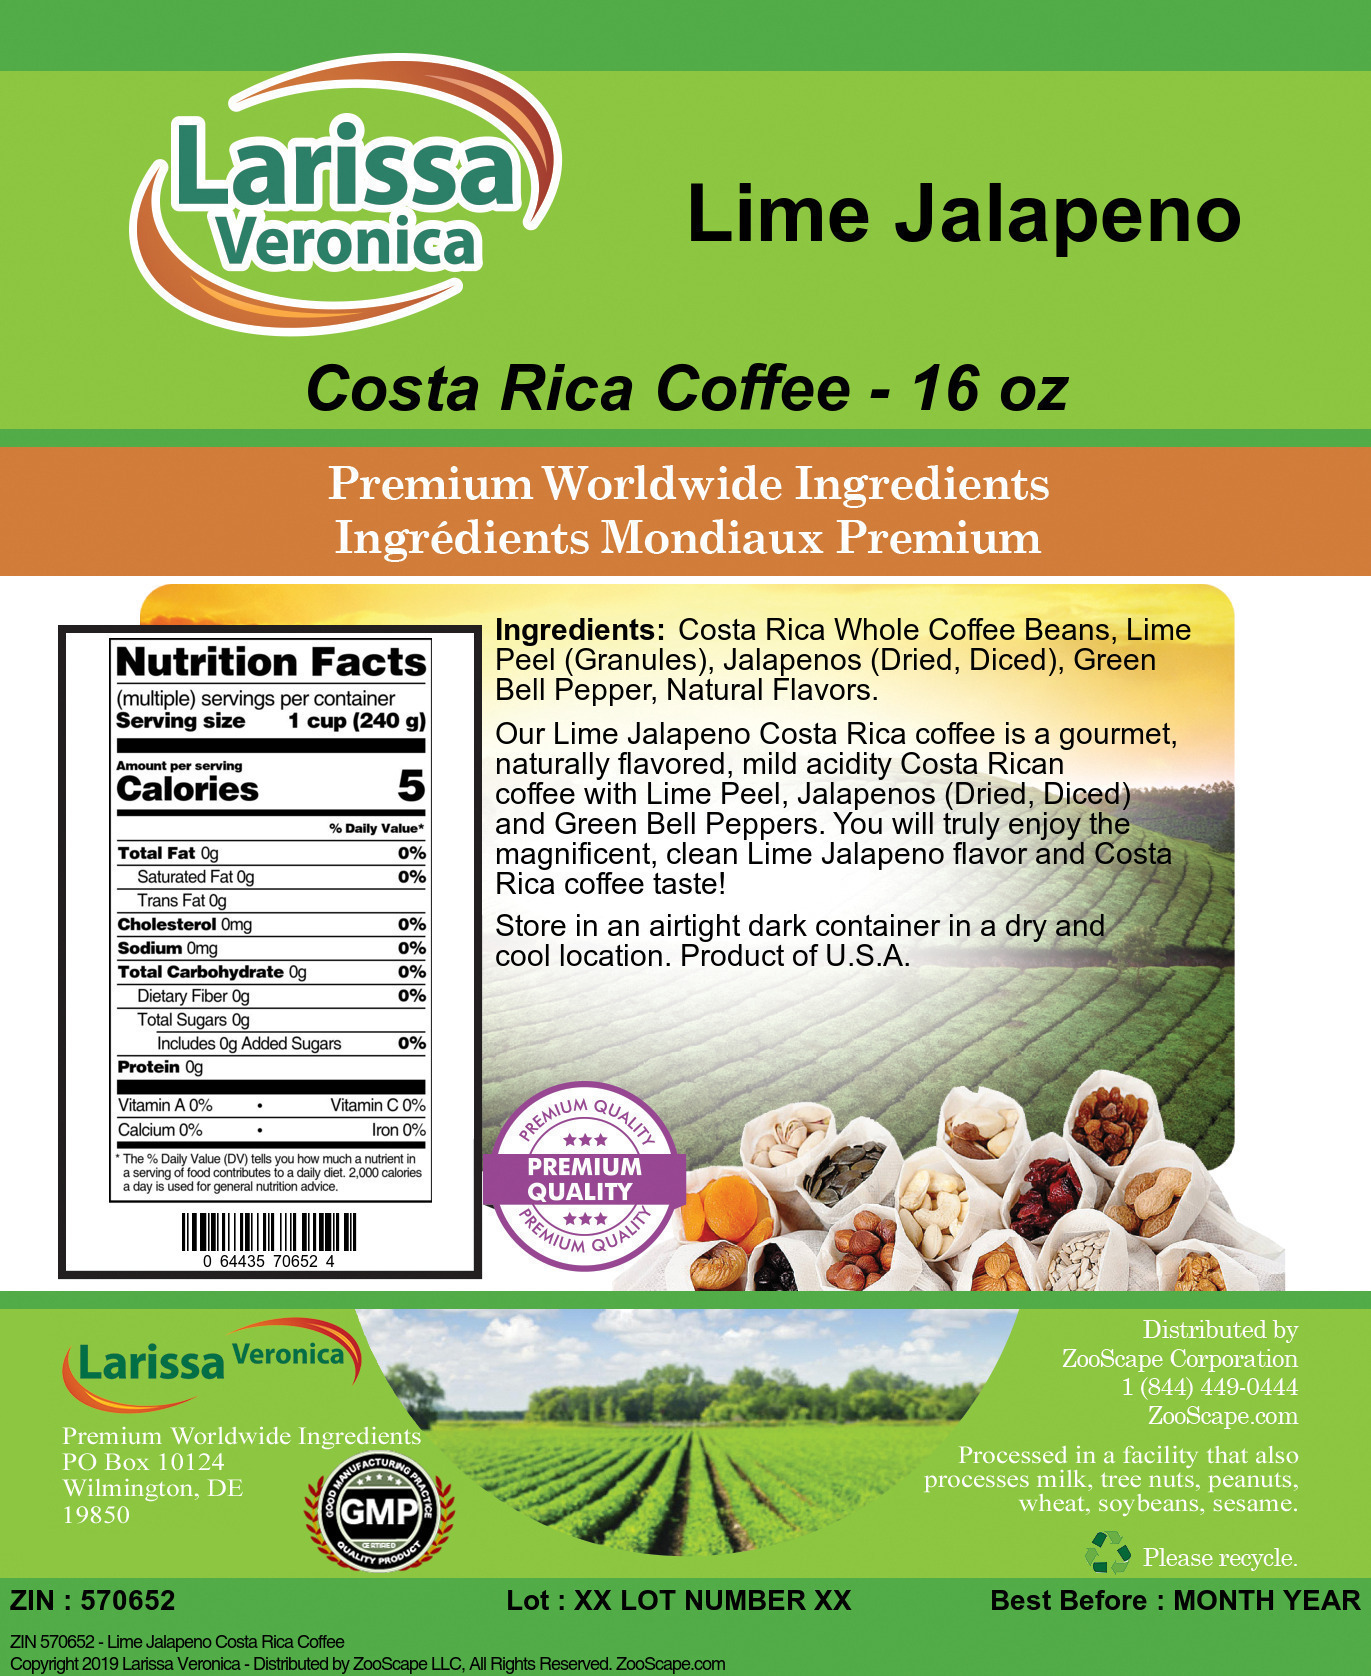 Lime Jalapeno Costa Rica Coffee - Label